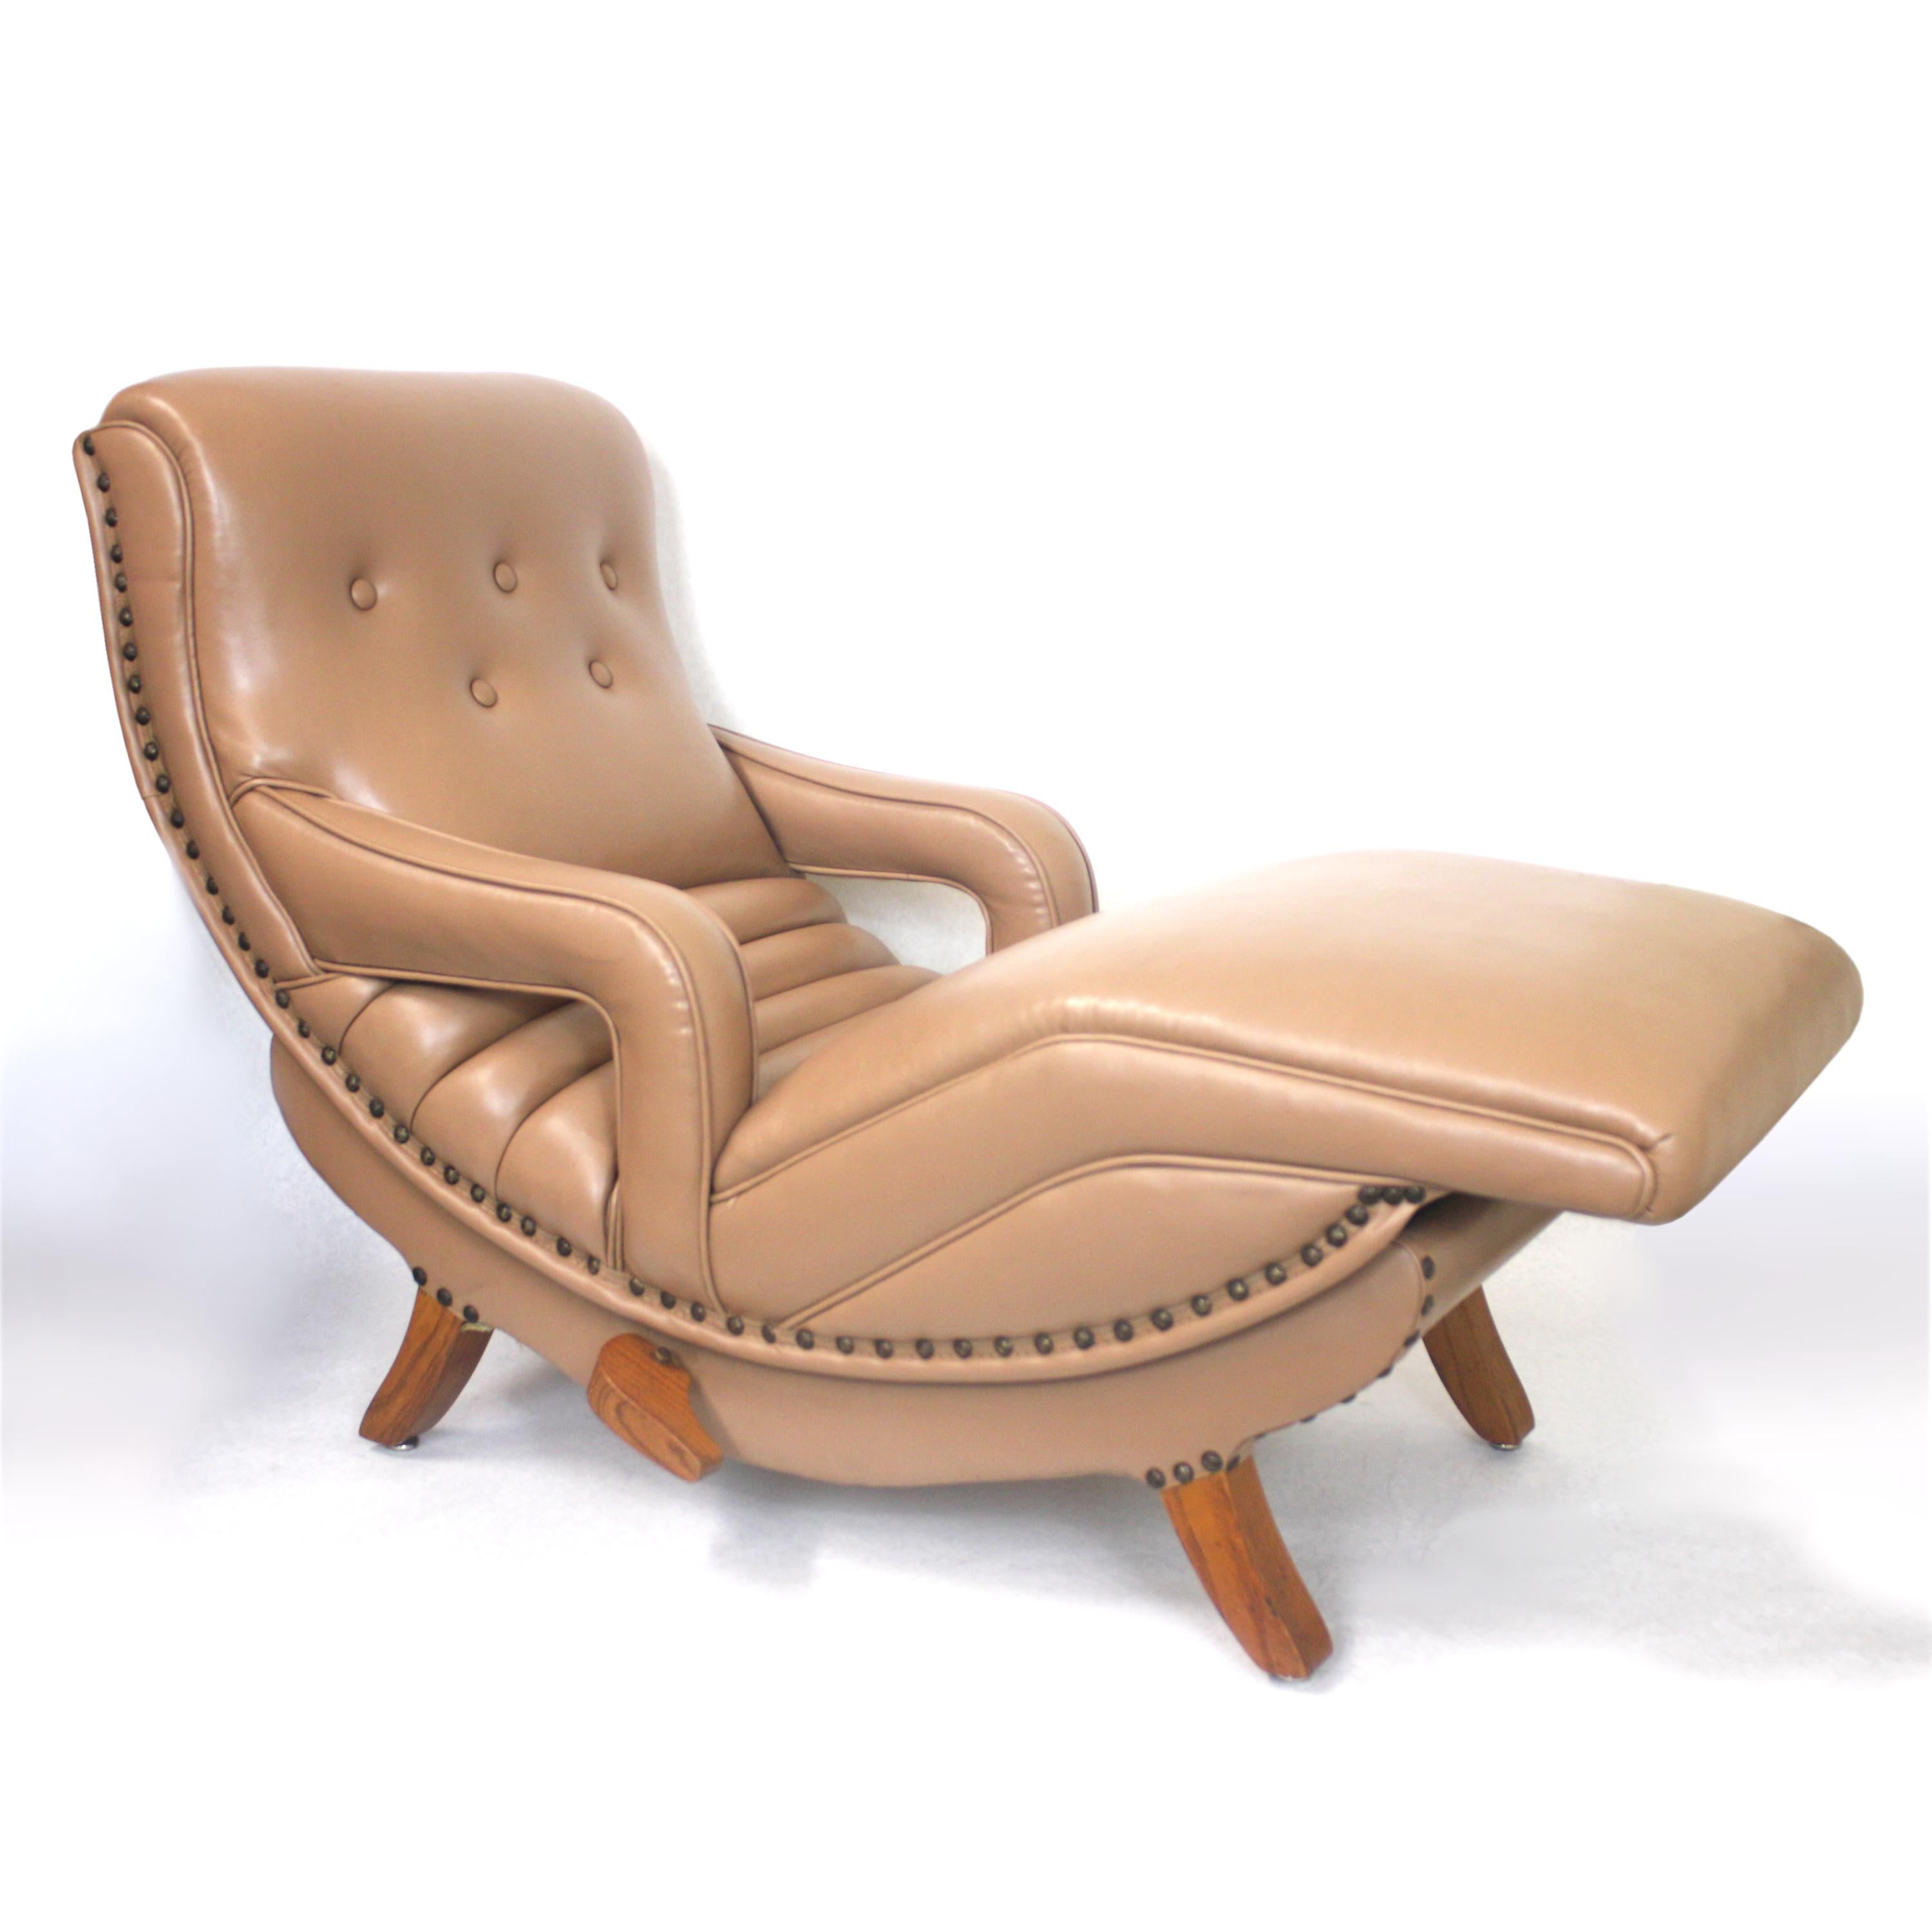 This is a rare piece indeed. A 3/4 scale, factory-made contour lounge chair. Only 40